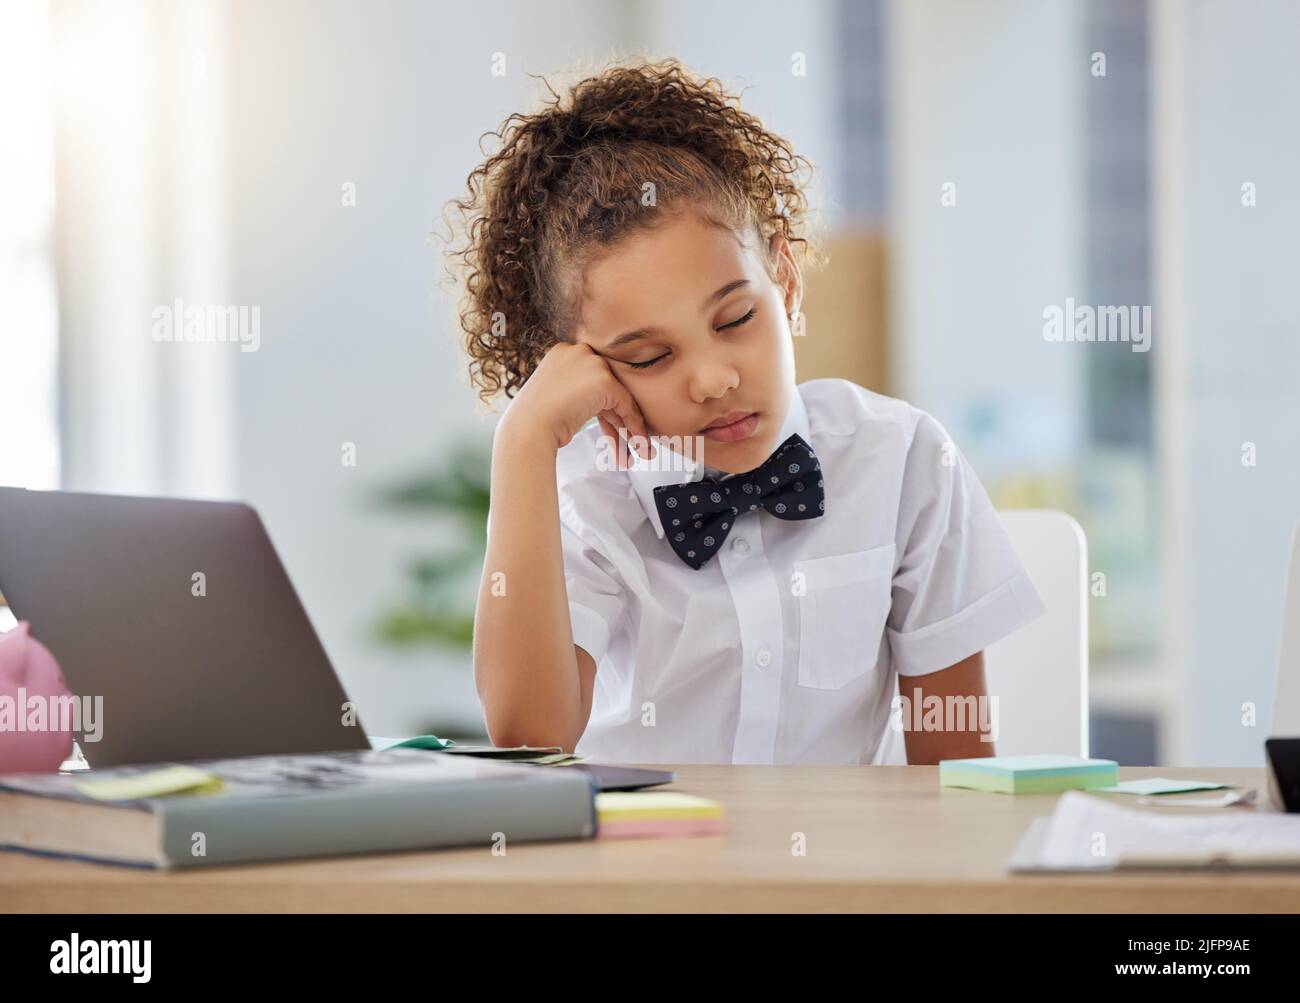 I missed my morning nap. Shot of an adorable little girl dressed as a businessperson sitting alone in an office and feeling sleepy. Stock Photo